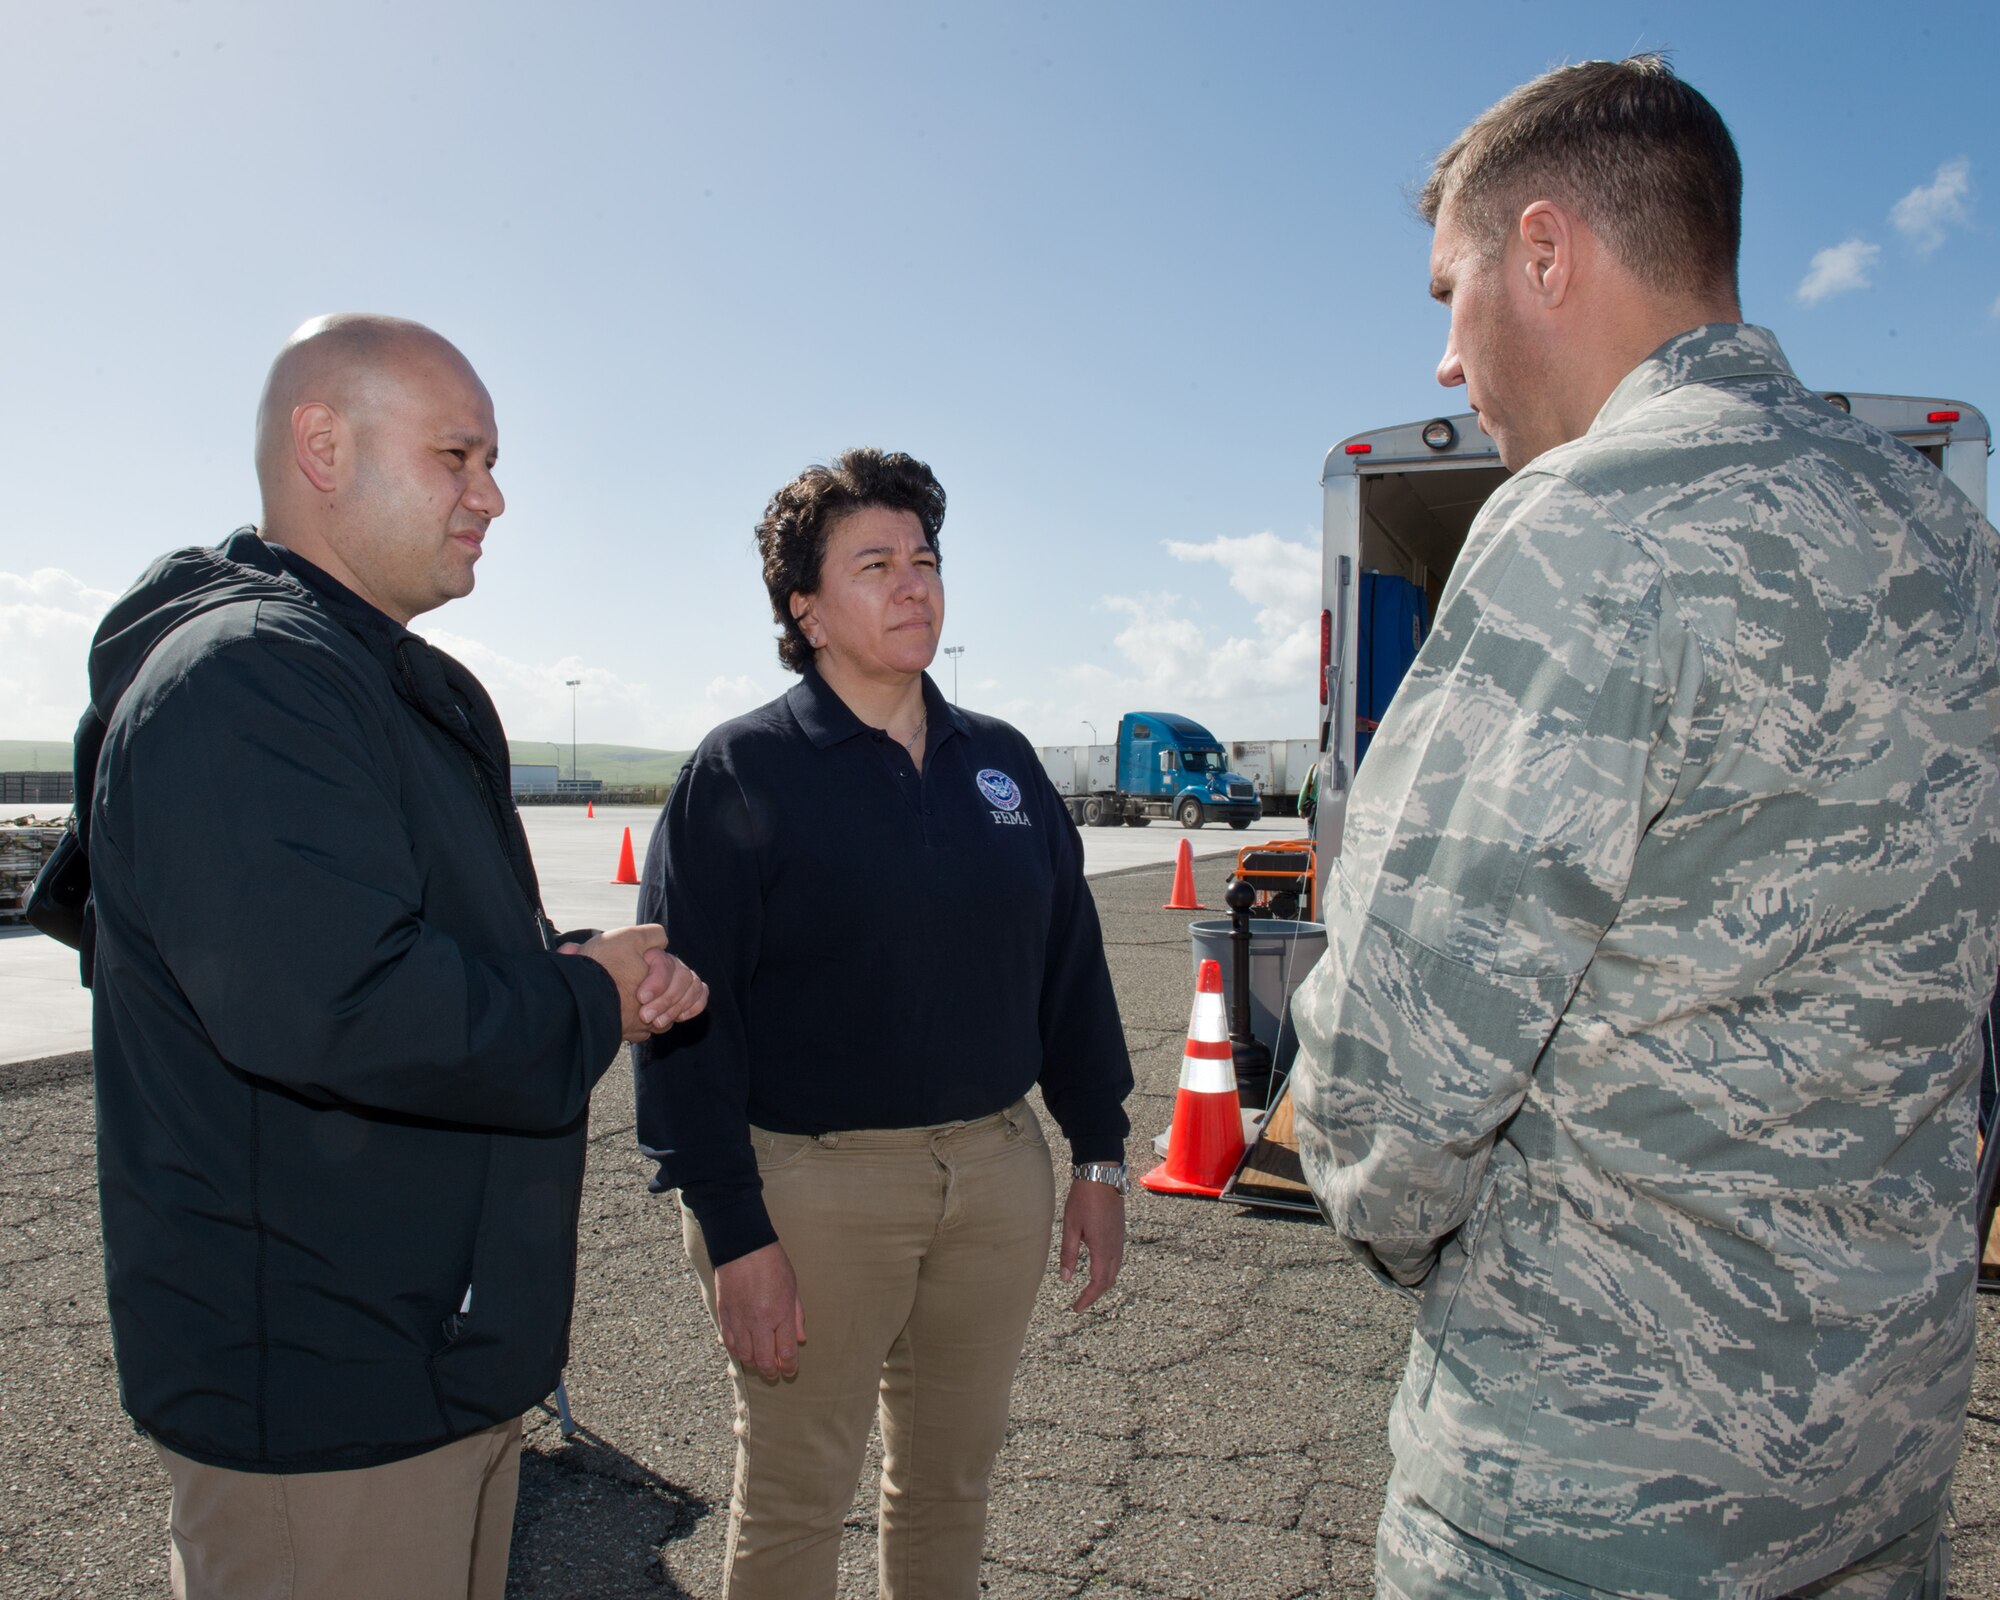 U.S. Air Force Col. John Klein, 60th Air Mobility Wing commander, talks with representatives from the Federal Emergency Management Agency at Travis Air Force Base, Calif., Feb. 16, 2017. Travis AFB is acting as a staging area for FEMA personnel, providing space for necessary equipment and supplies in case of the Oroville auxiliary spillway failure. (U.S. Air Force photo/Louis Briscese)